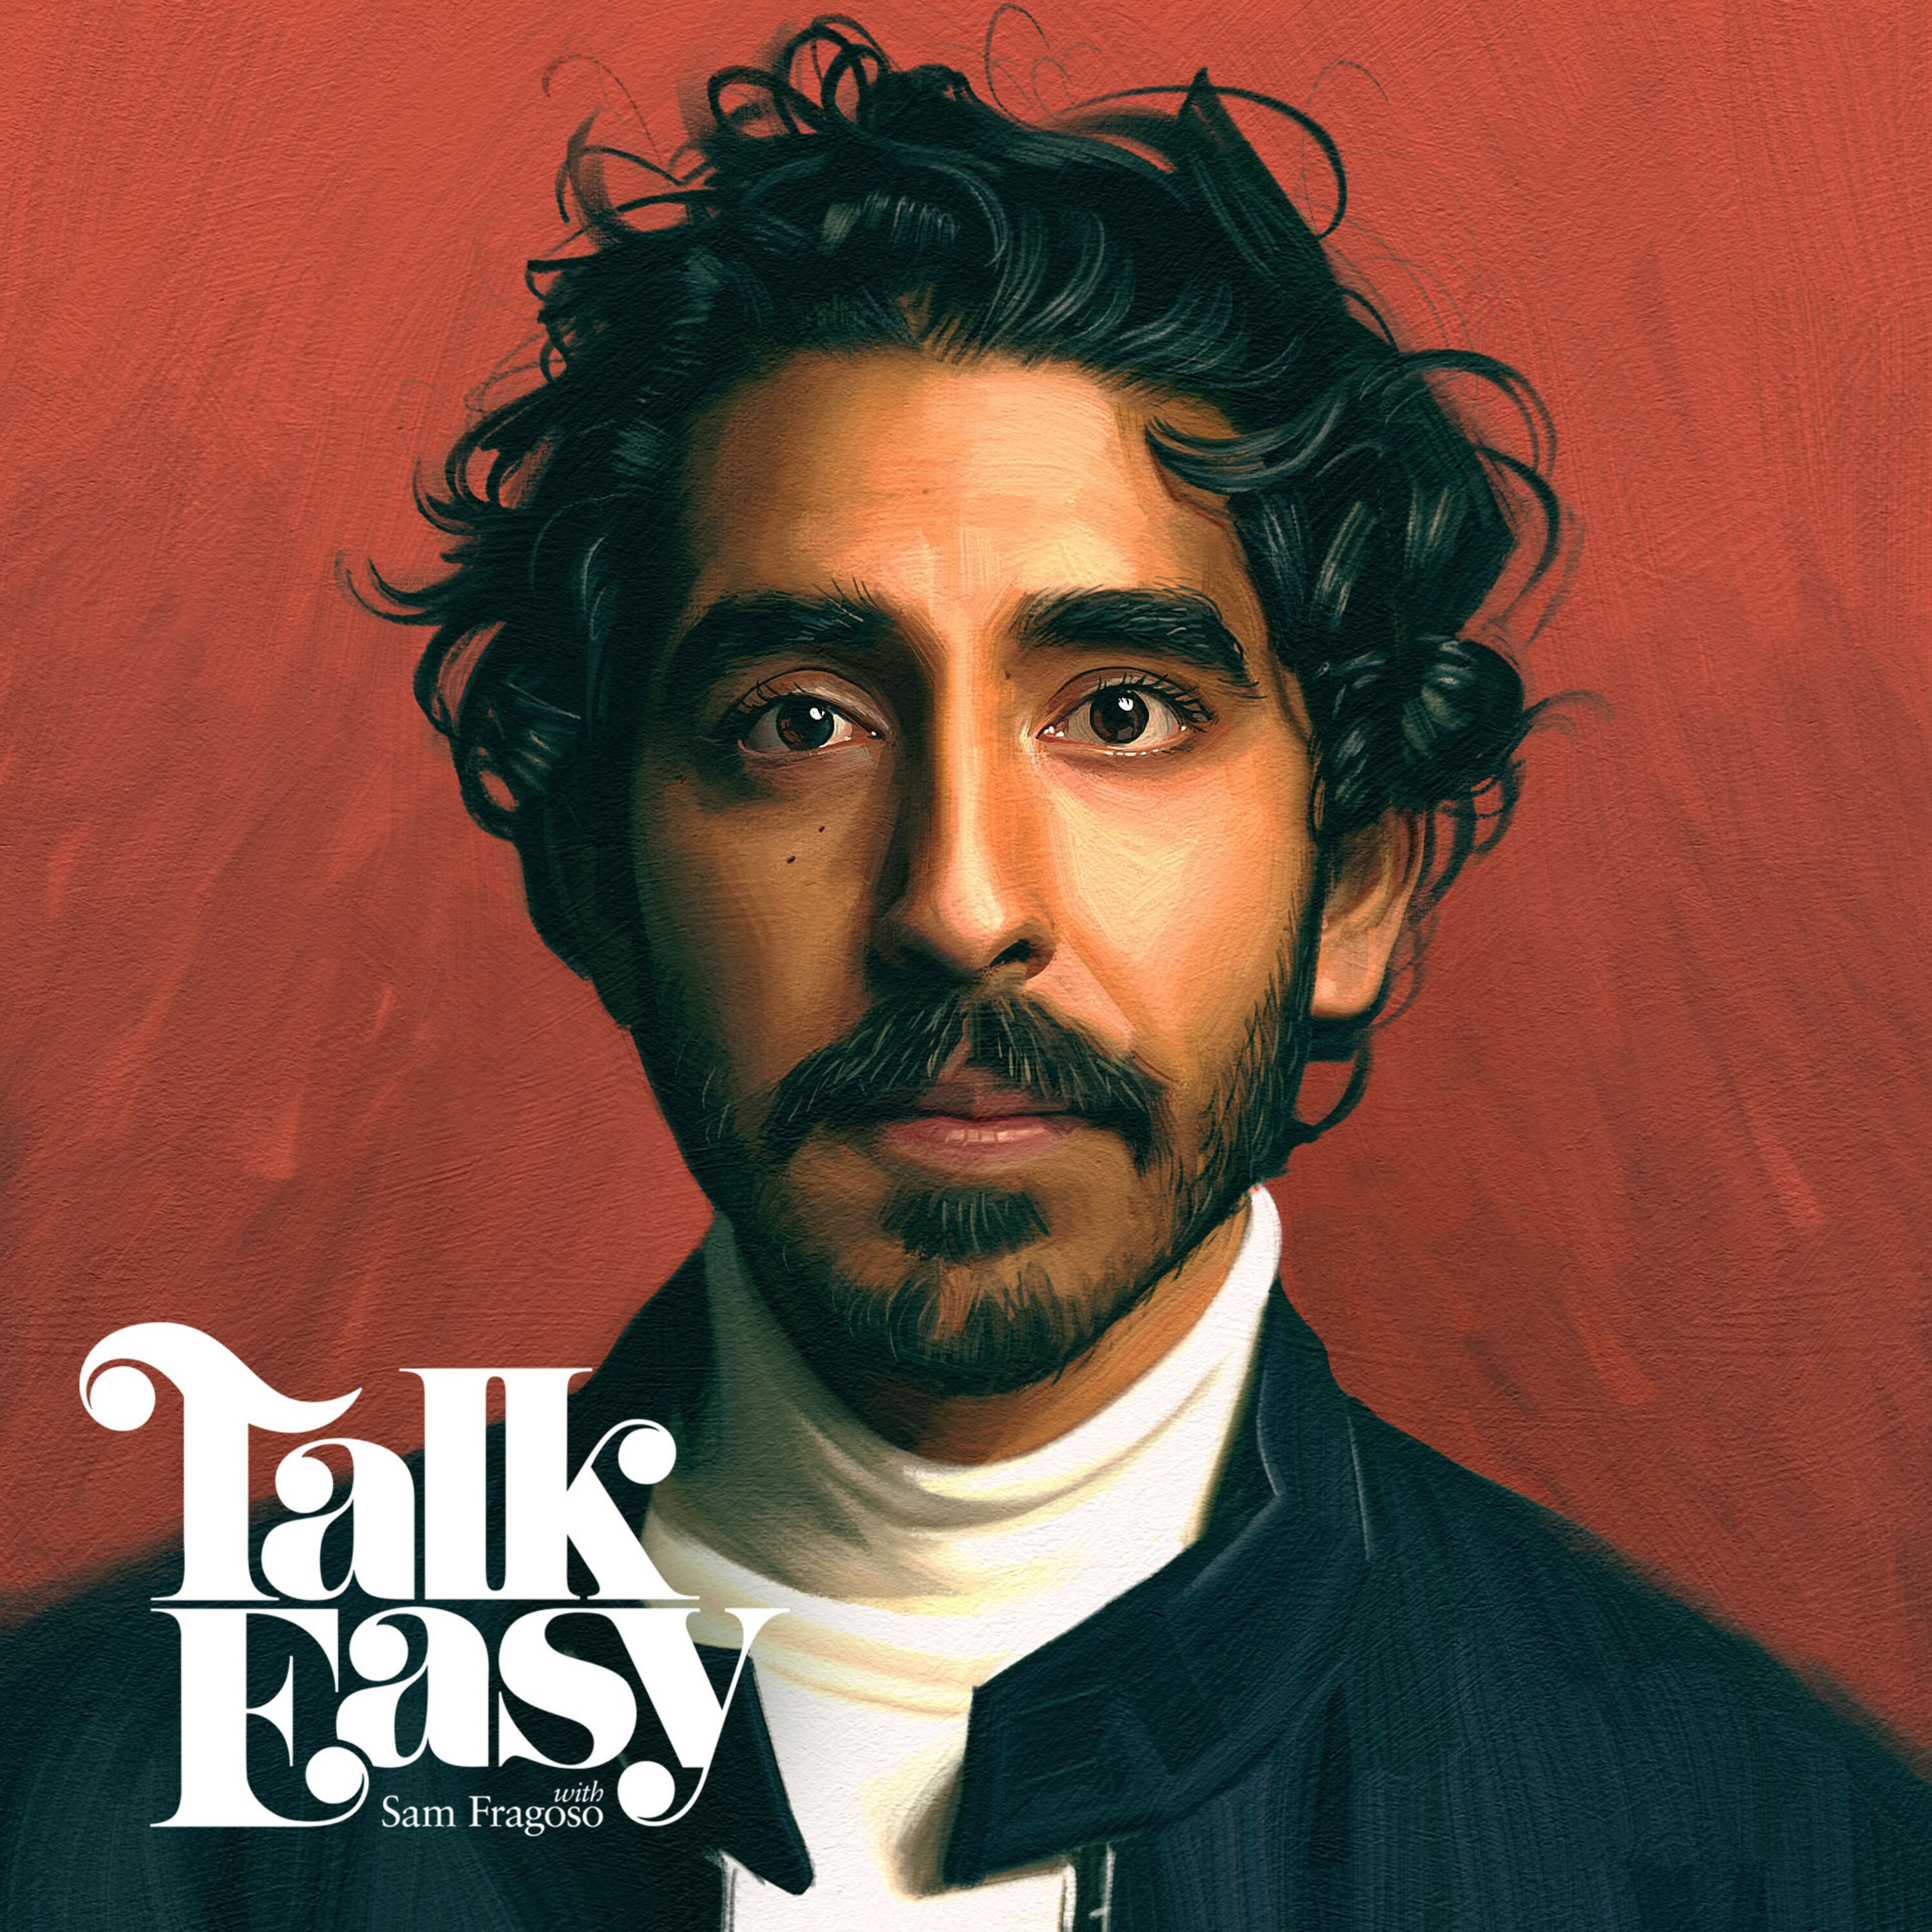 Actor and Director Dev Patel is a Leading Man